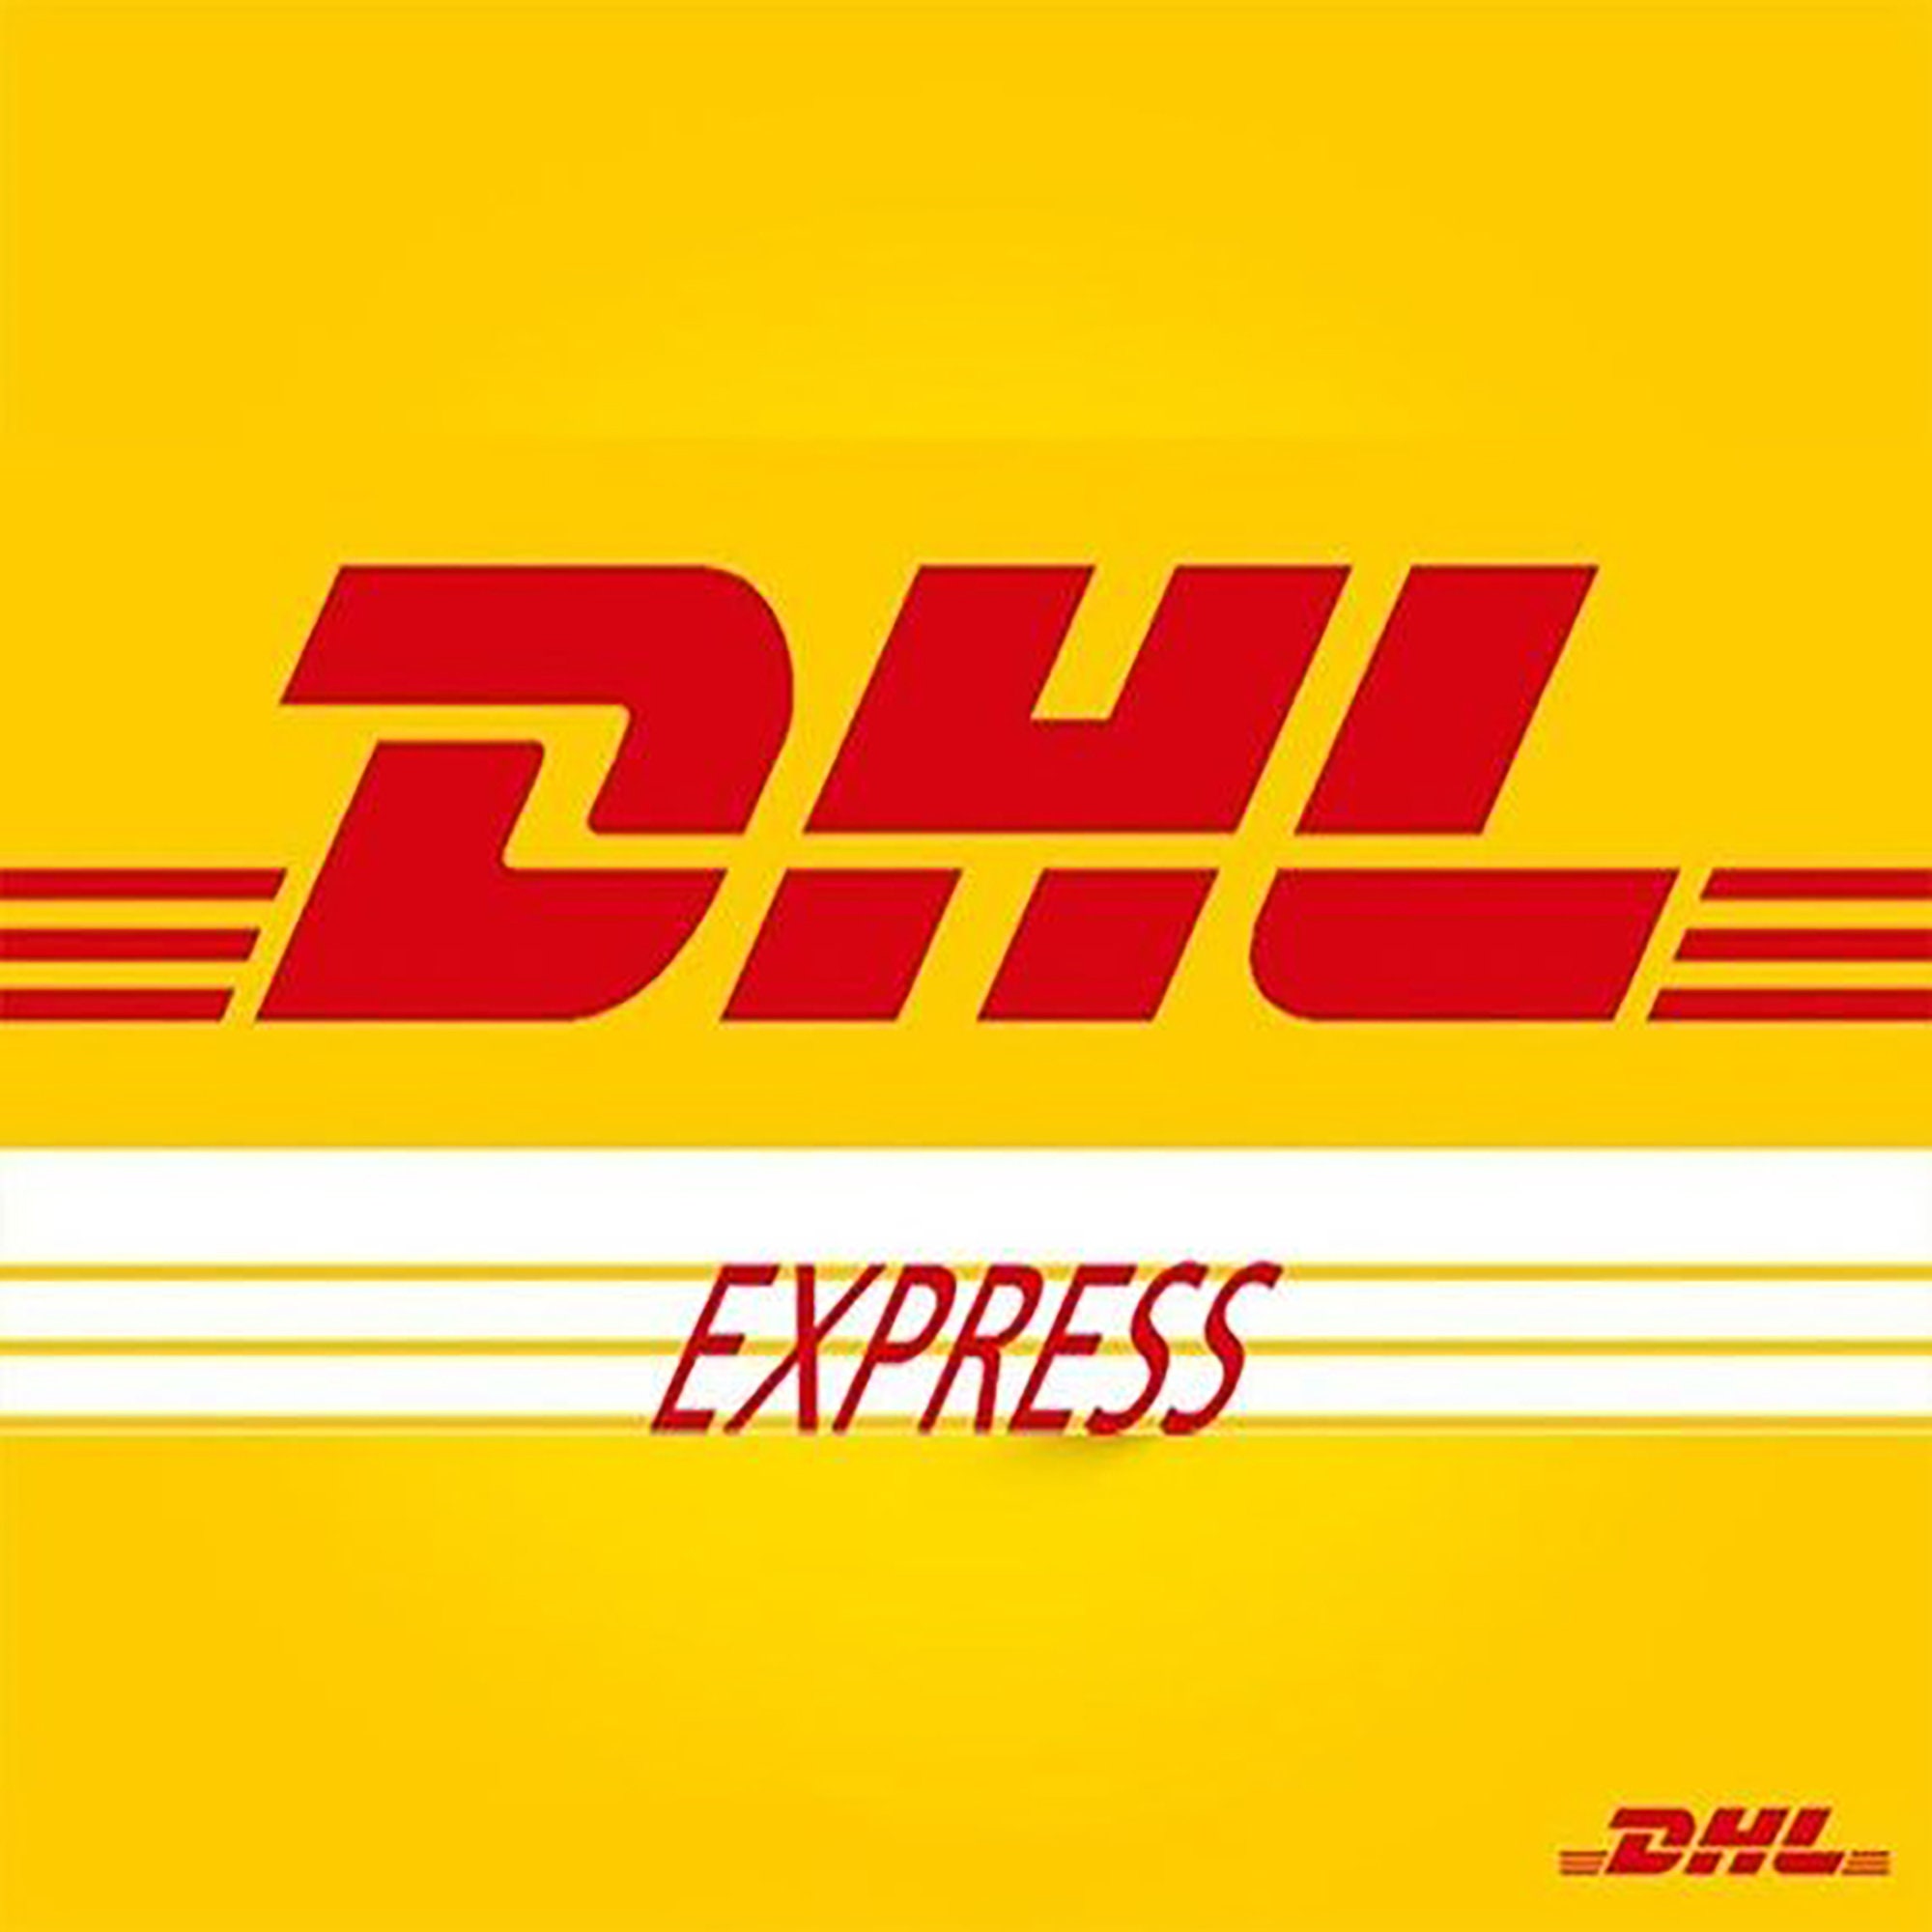 Upgrade to DHL 24 express delivery - Artsy Laser